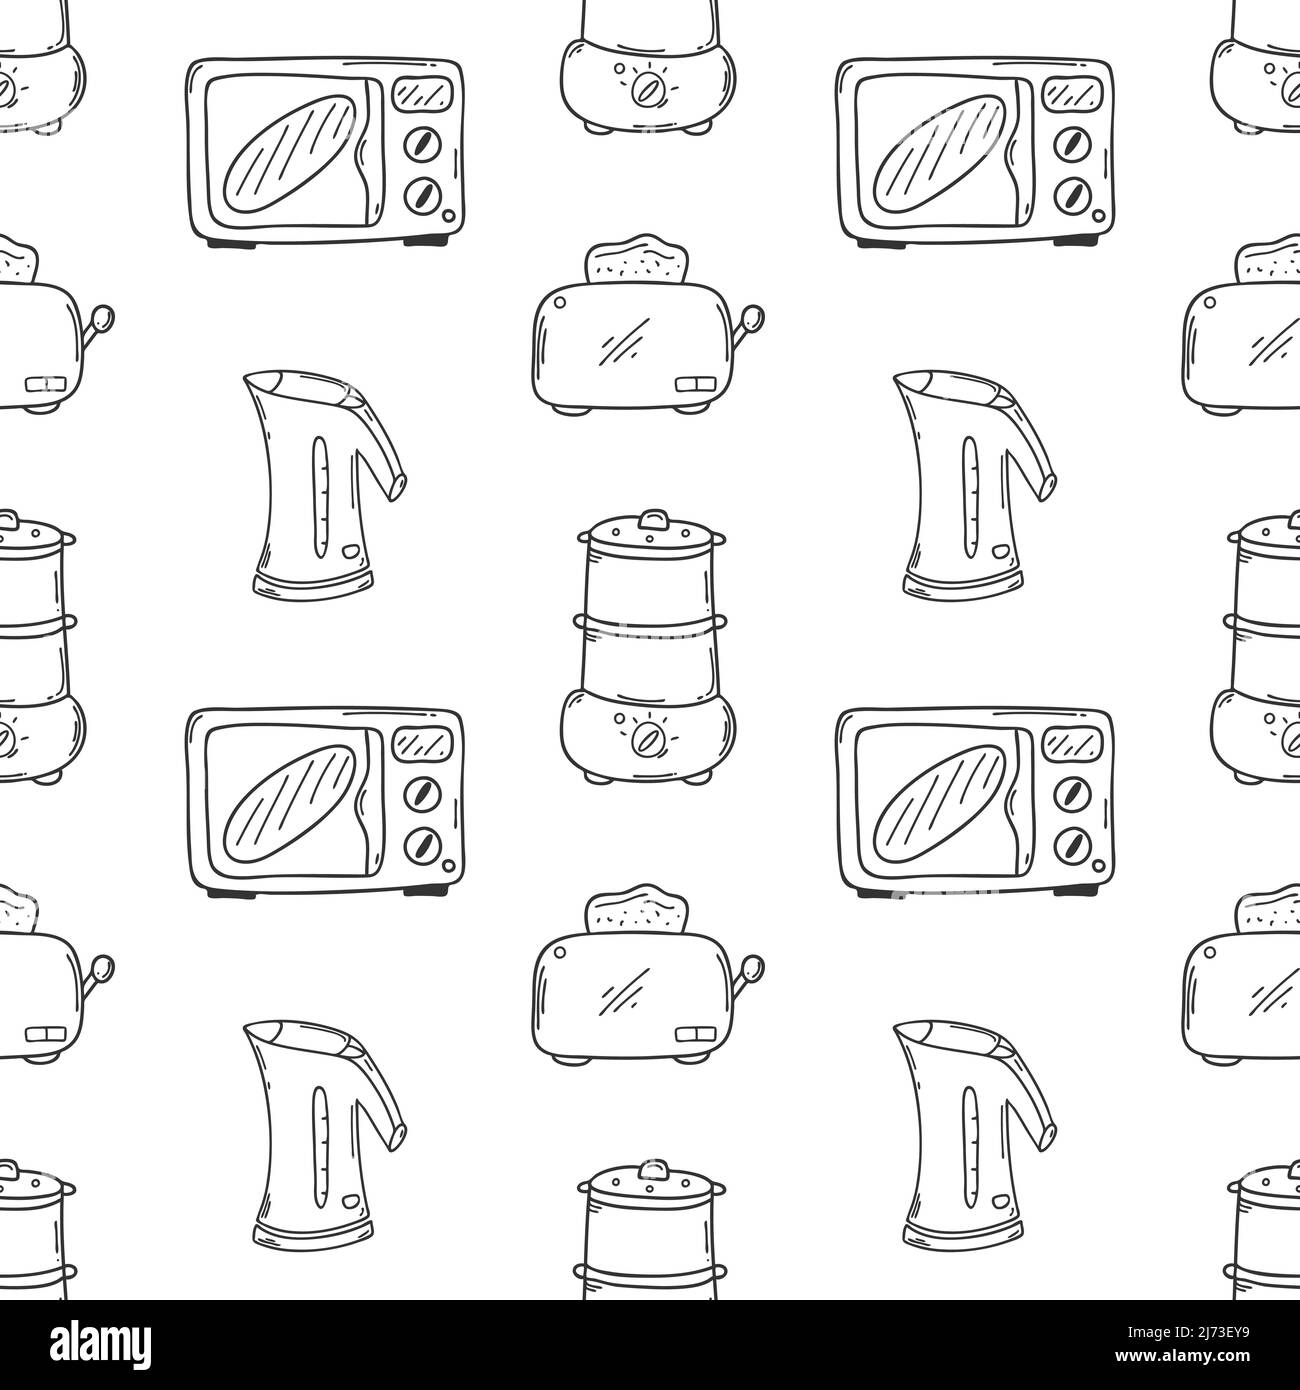 Seamless pattern with kitchen appliances. Microwave, kettle, toaster, steamer. A monochrome backdrop with simple hand-drawn outline doodle elements. B Stock Vector